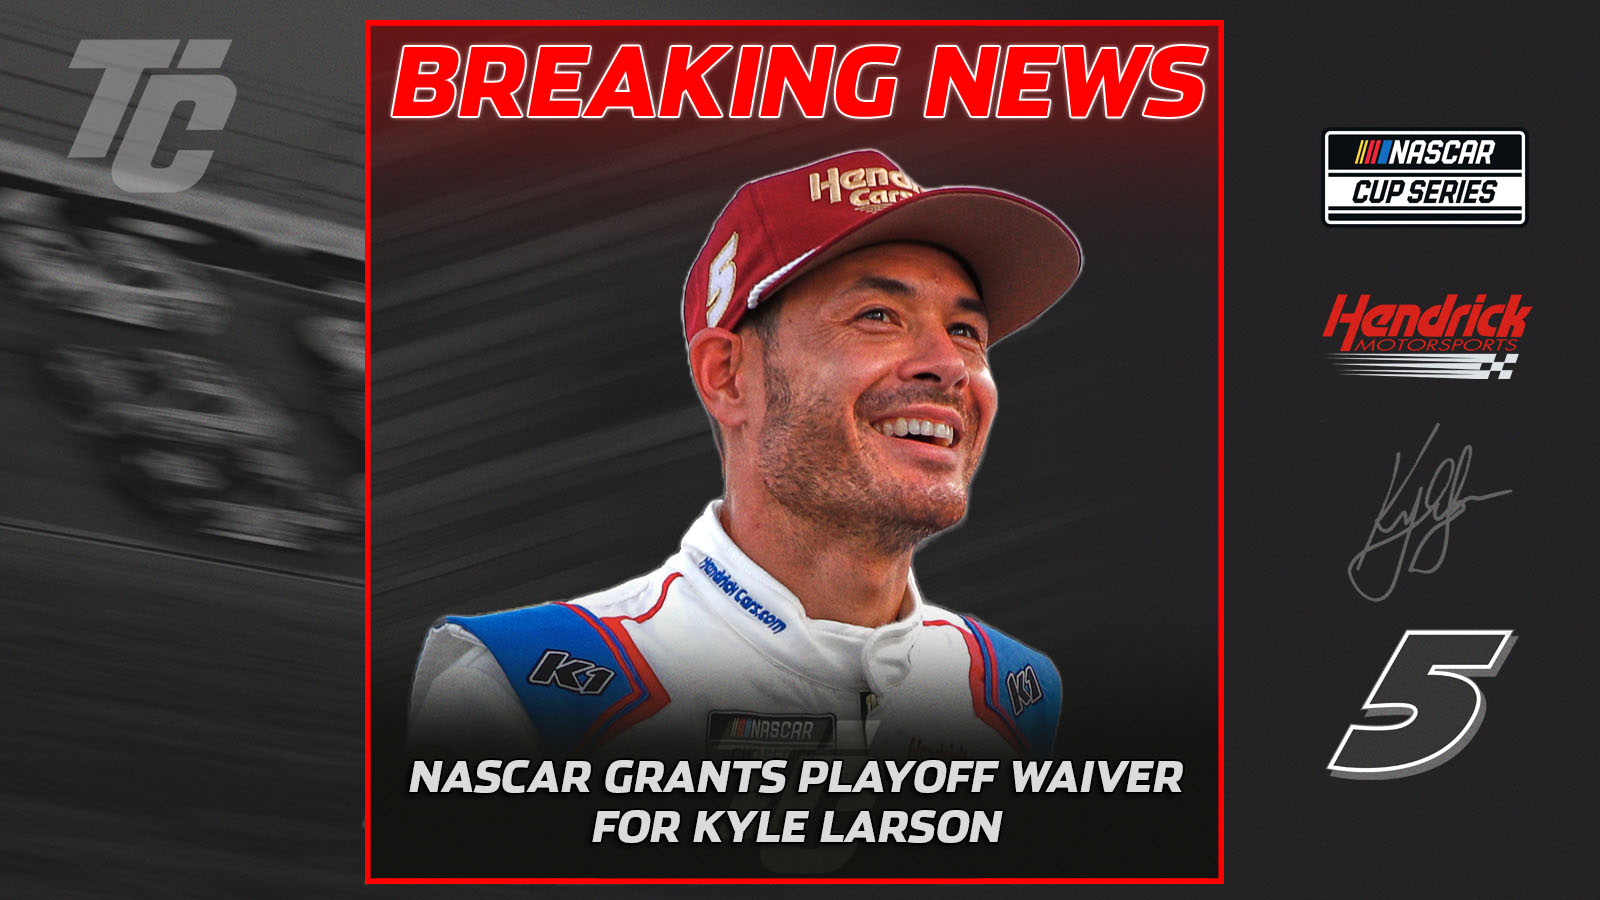 Kyle Larson Playoff Waiver NASCAR grants Kyle Larson his Playoff Waiver